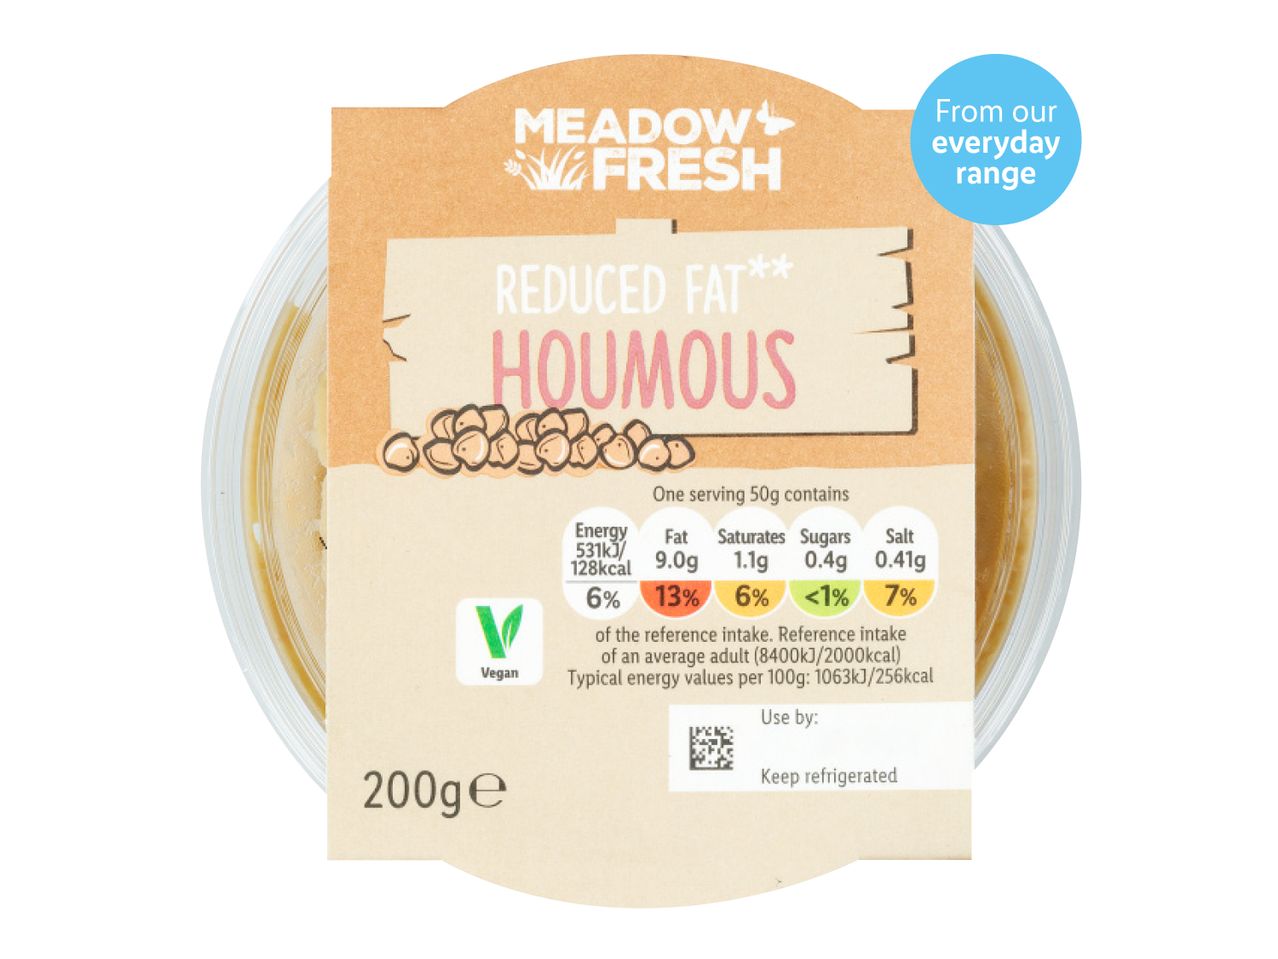 Go to full screen view: Meadow Fresh Houmous - Image 1